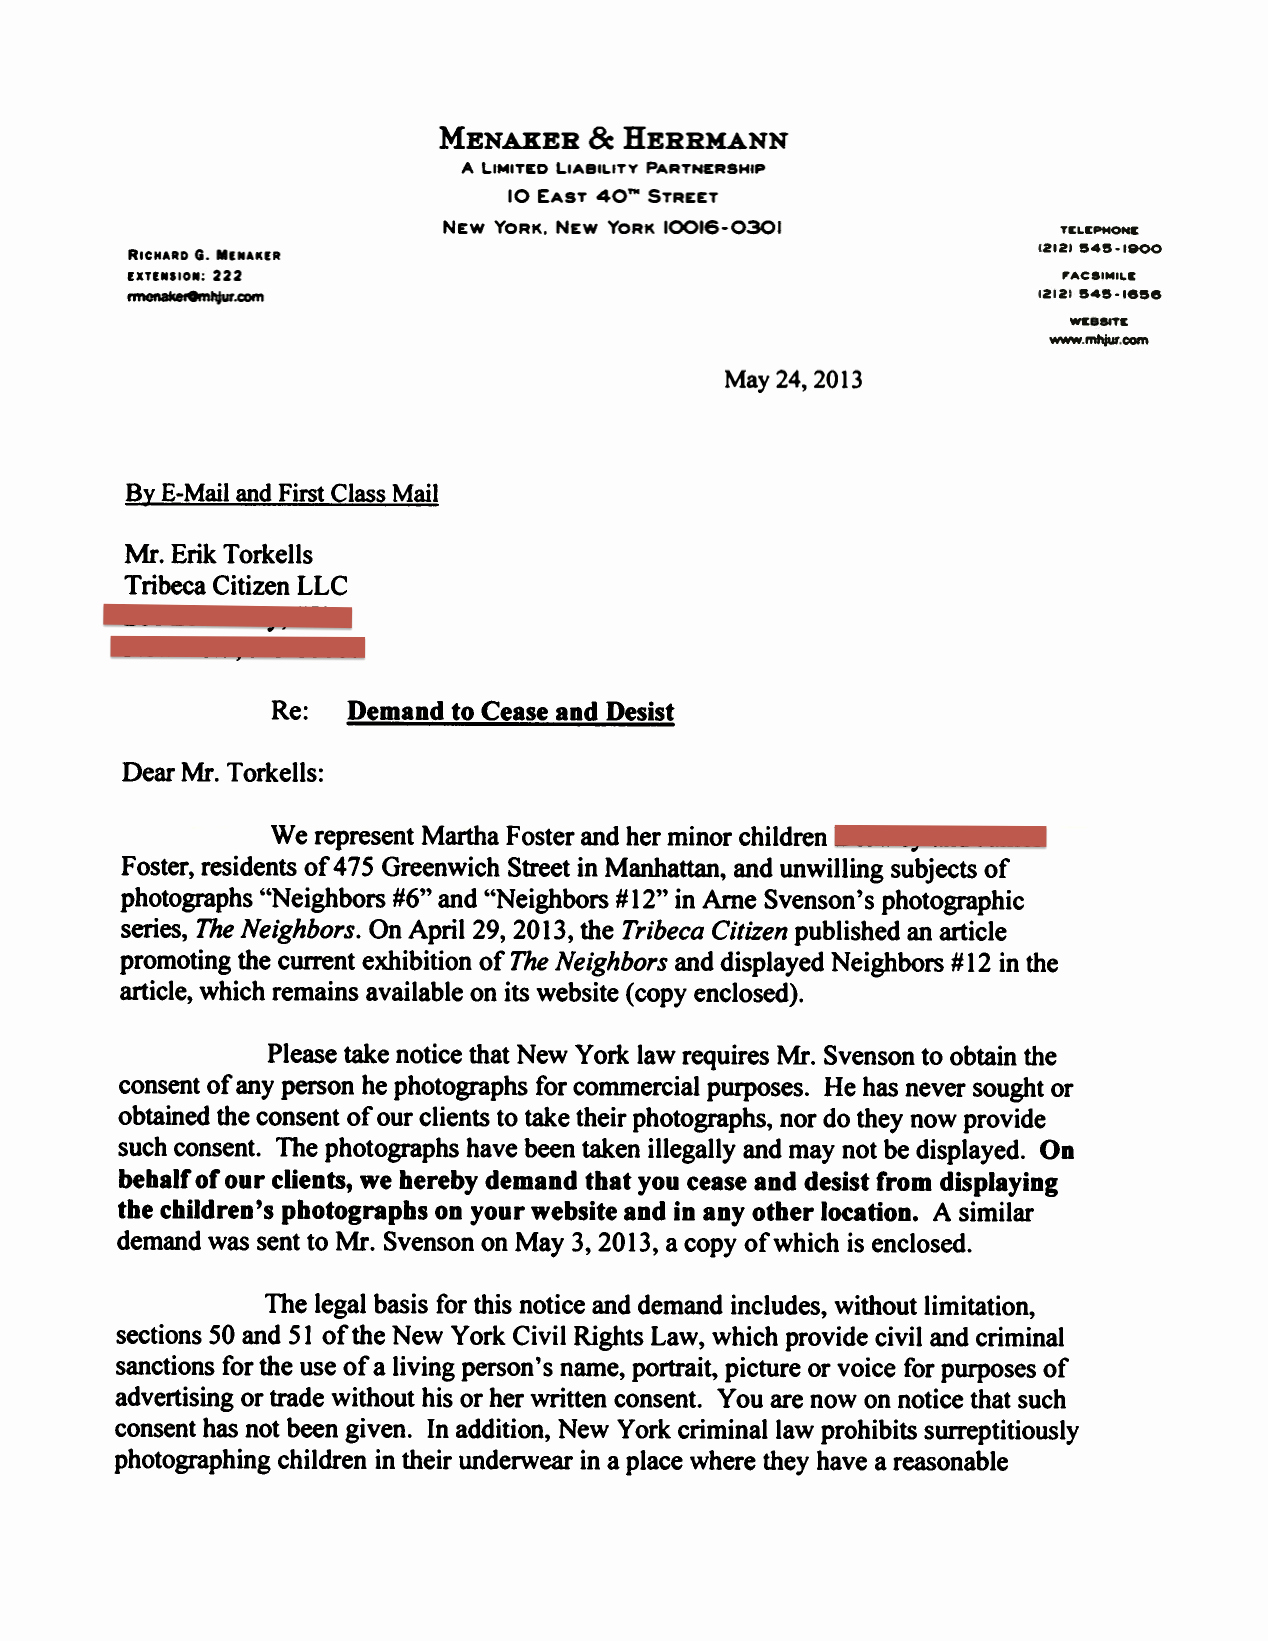 Cease and Desist Letters Sample Luxury Tribeca Citizen